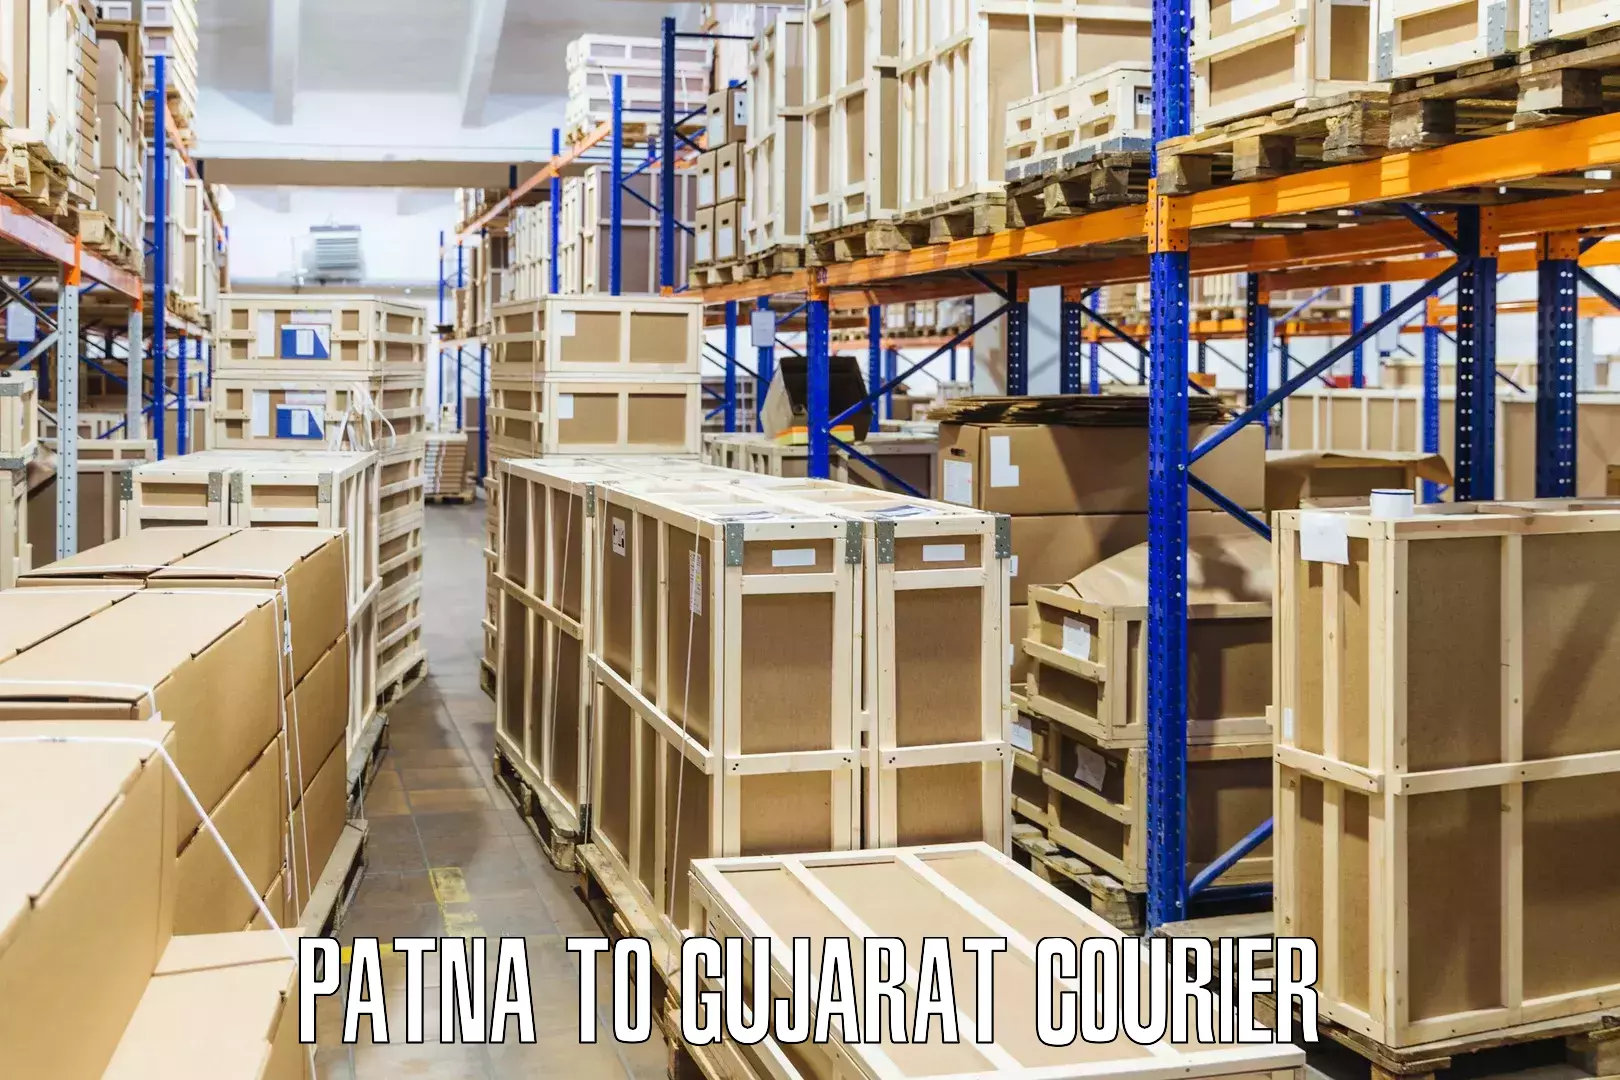 Subscription-based courier Patna to Becharaji